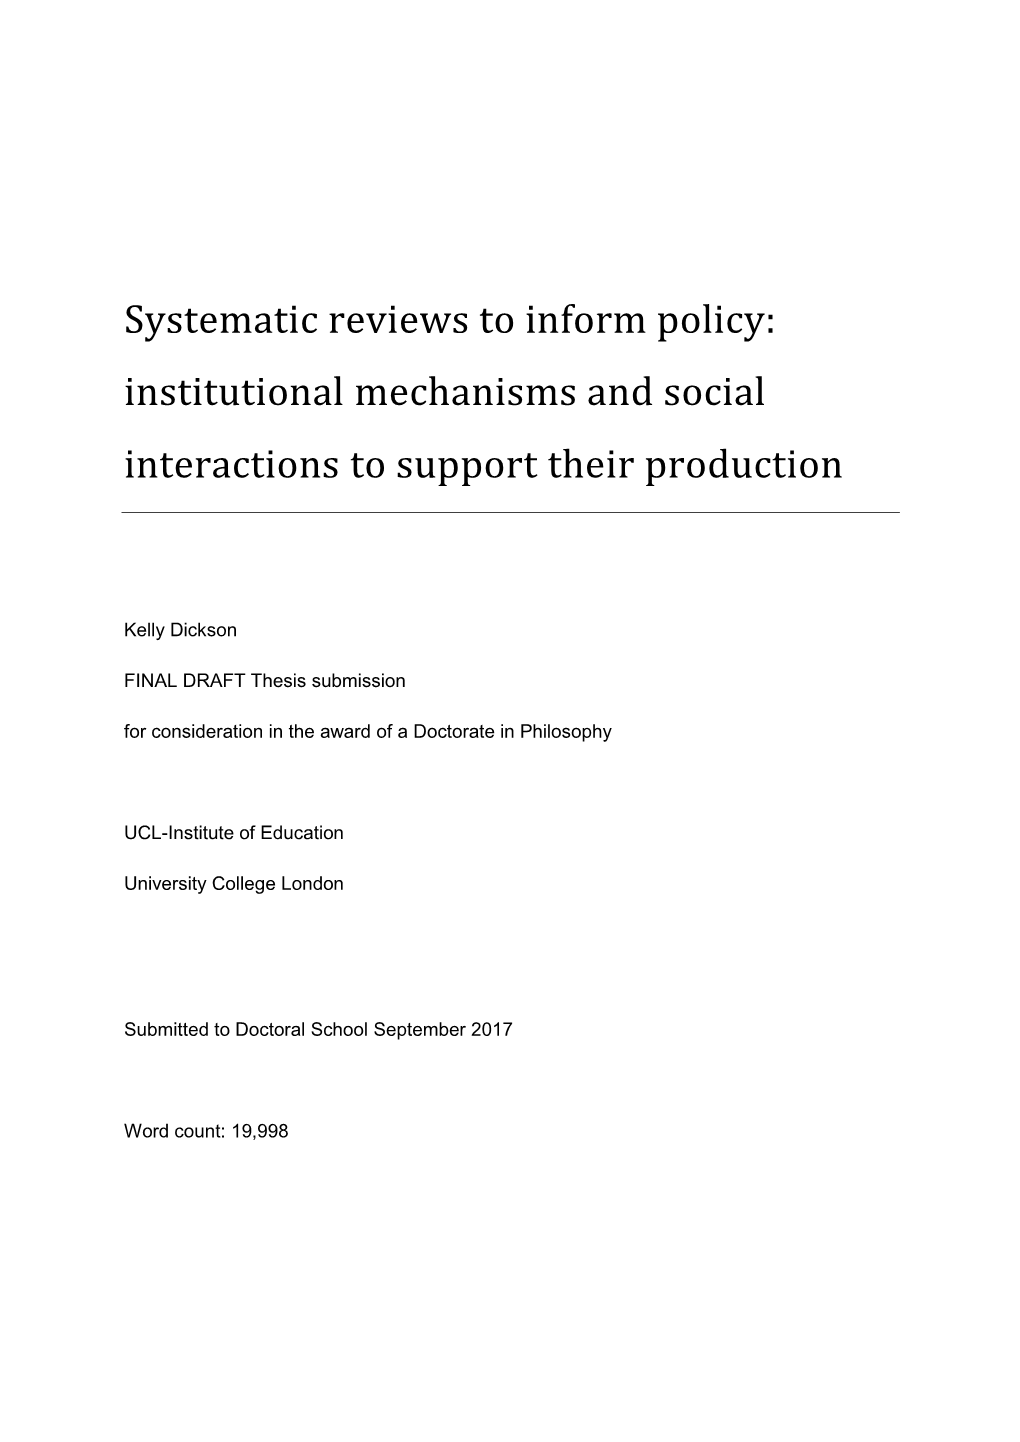 Systematic Reviews to Inform Policy: Institutional Mechanisms and Social Interactions to Support Their Production